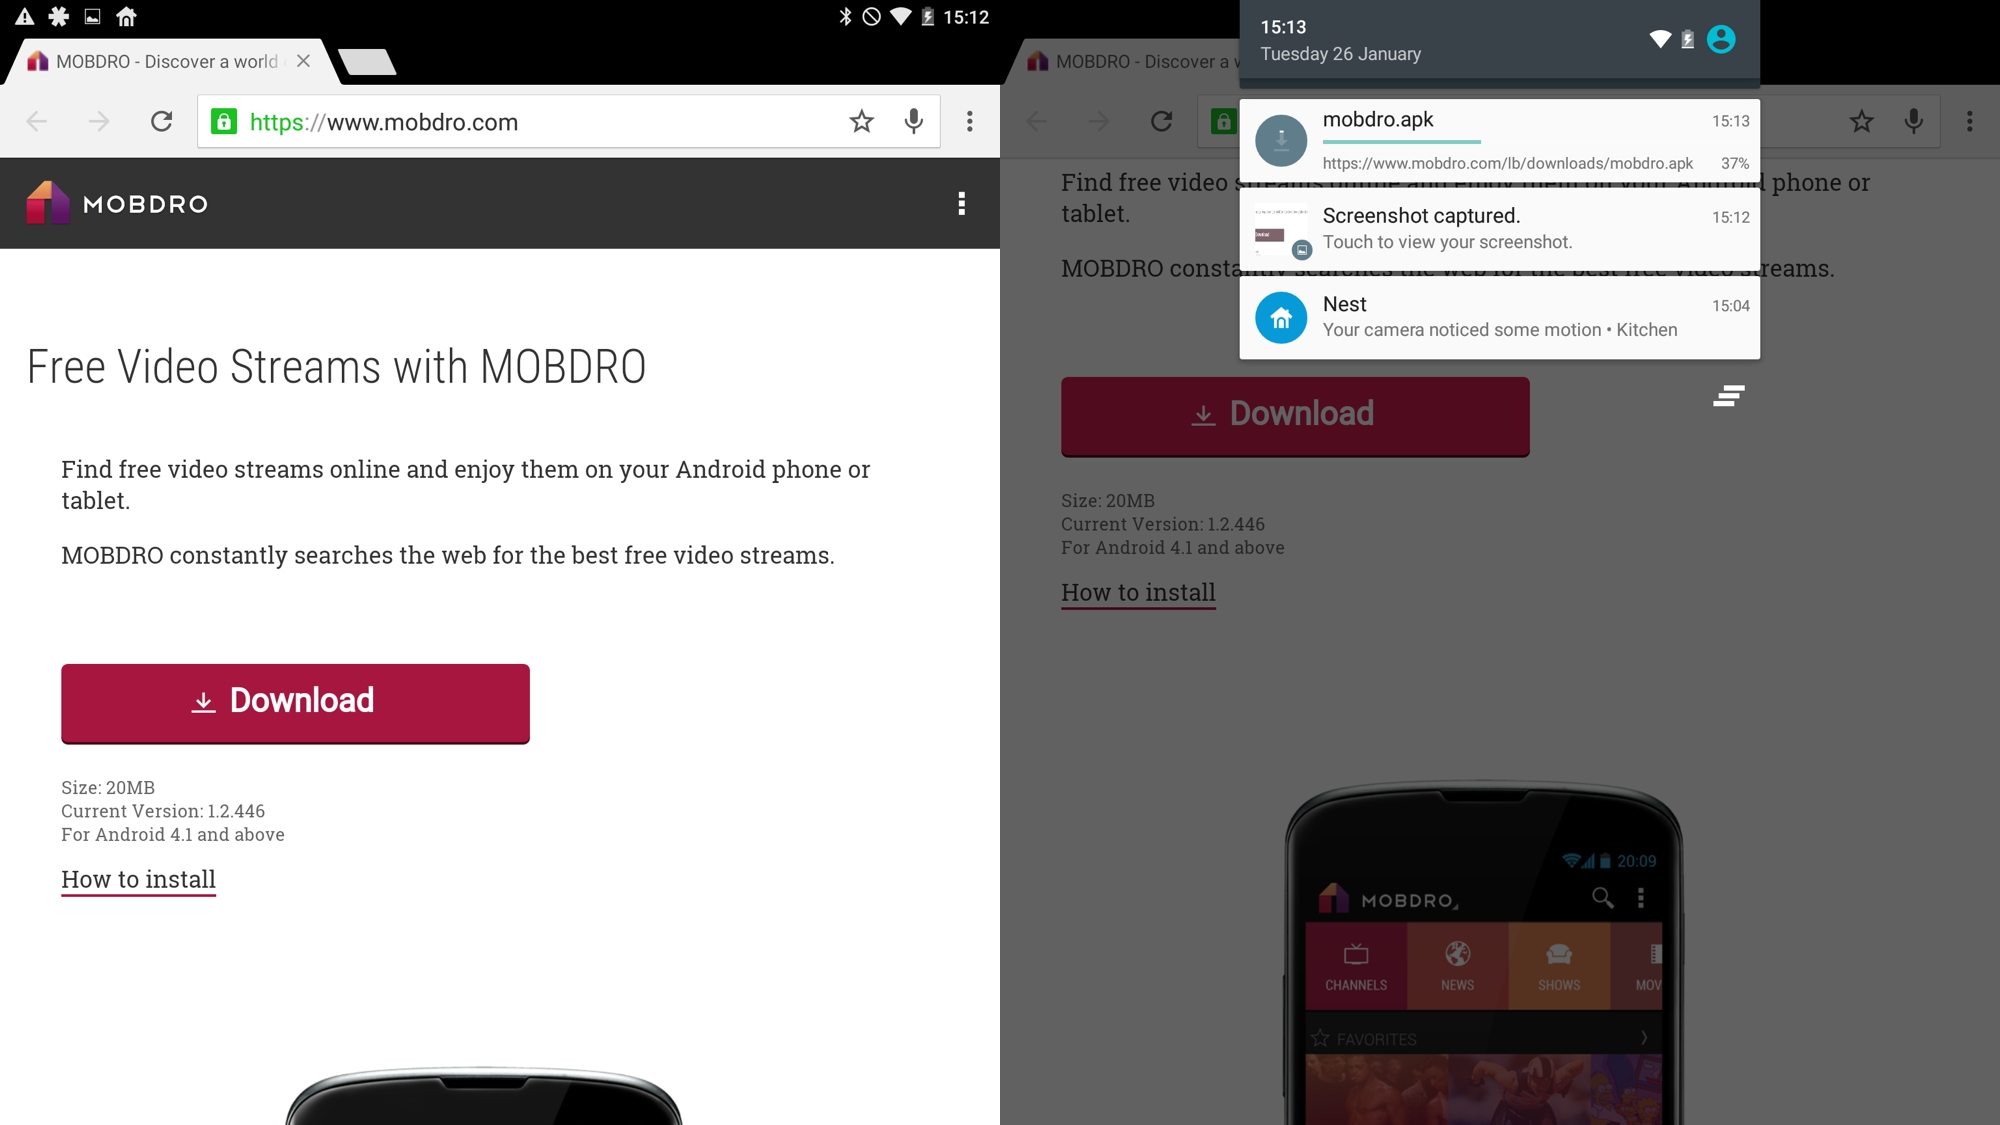 How To Install Mobdro On Your Android Smartphone Or Tablet